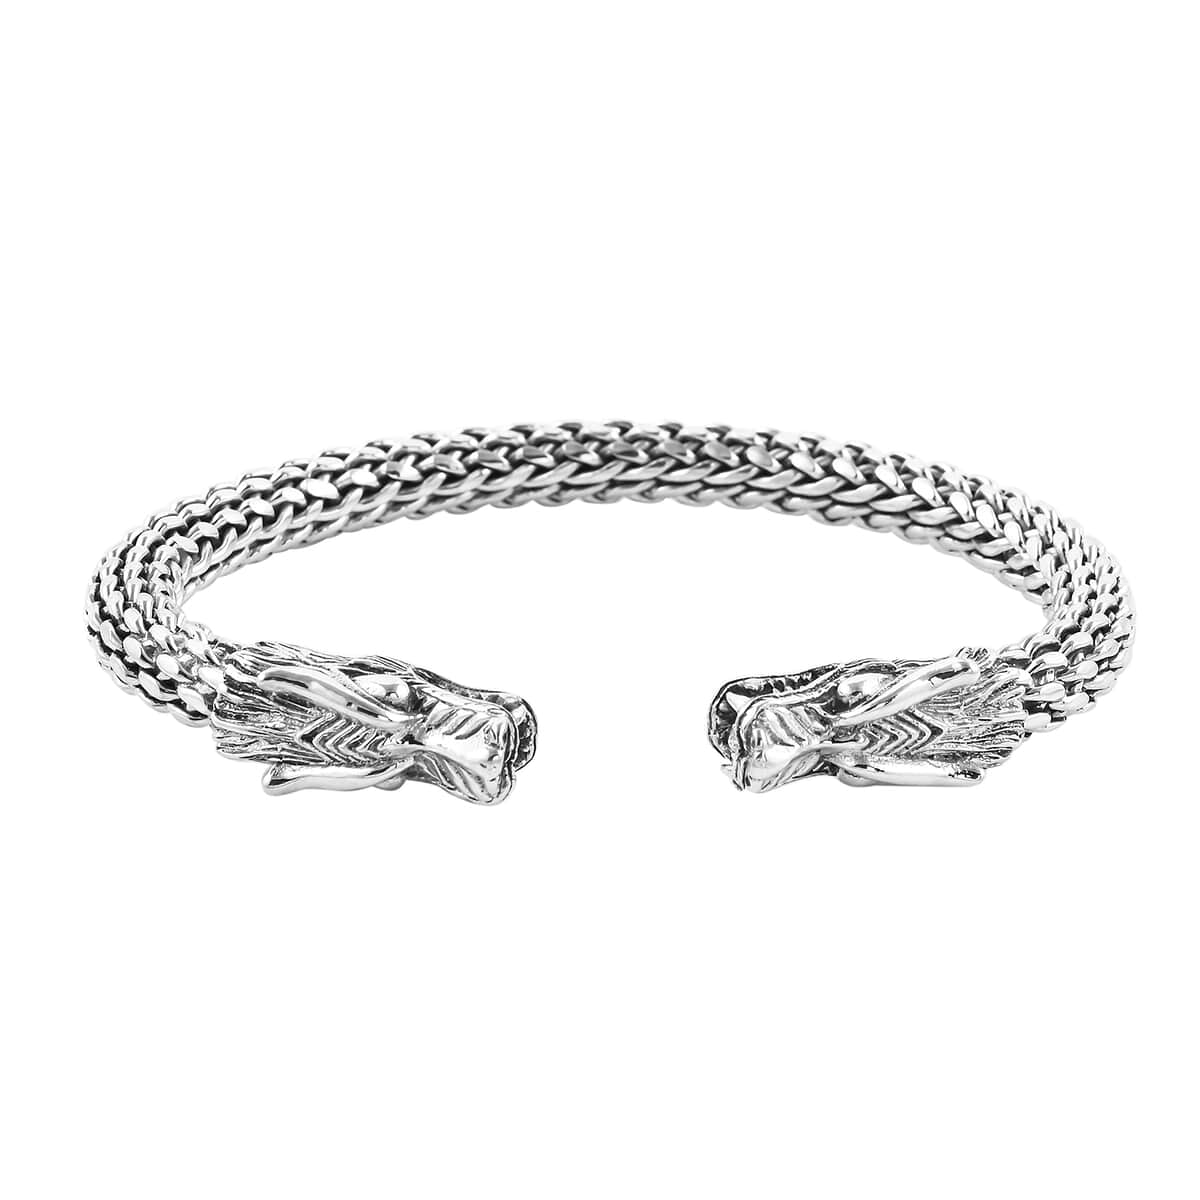 Bali Legacy Sterling Silver Dragon Cuff Bracelet (7.25 in) 49.35 Grams image number 0